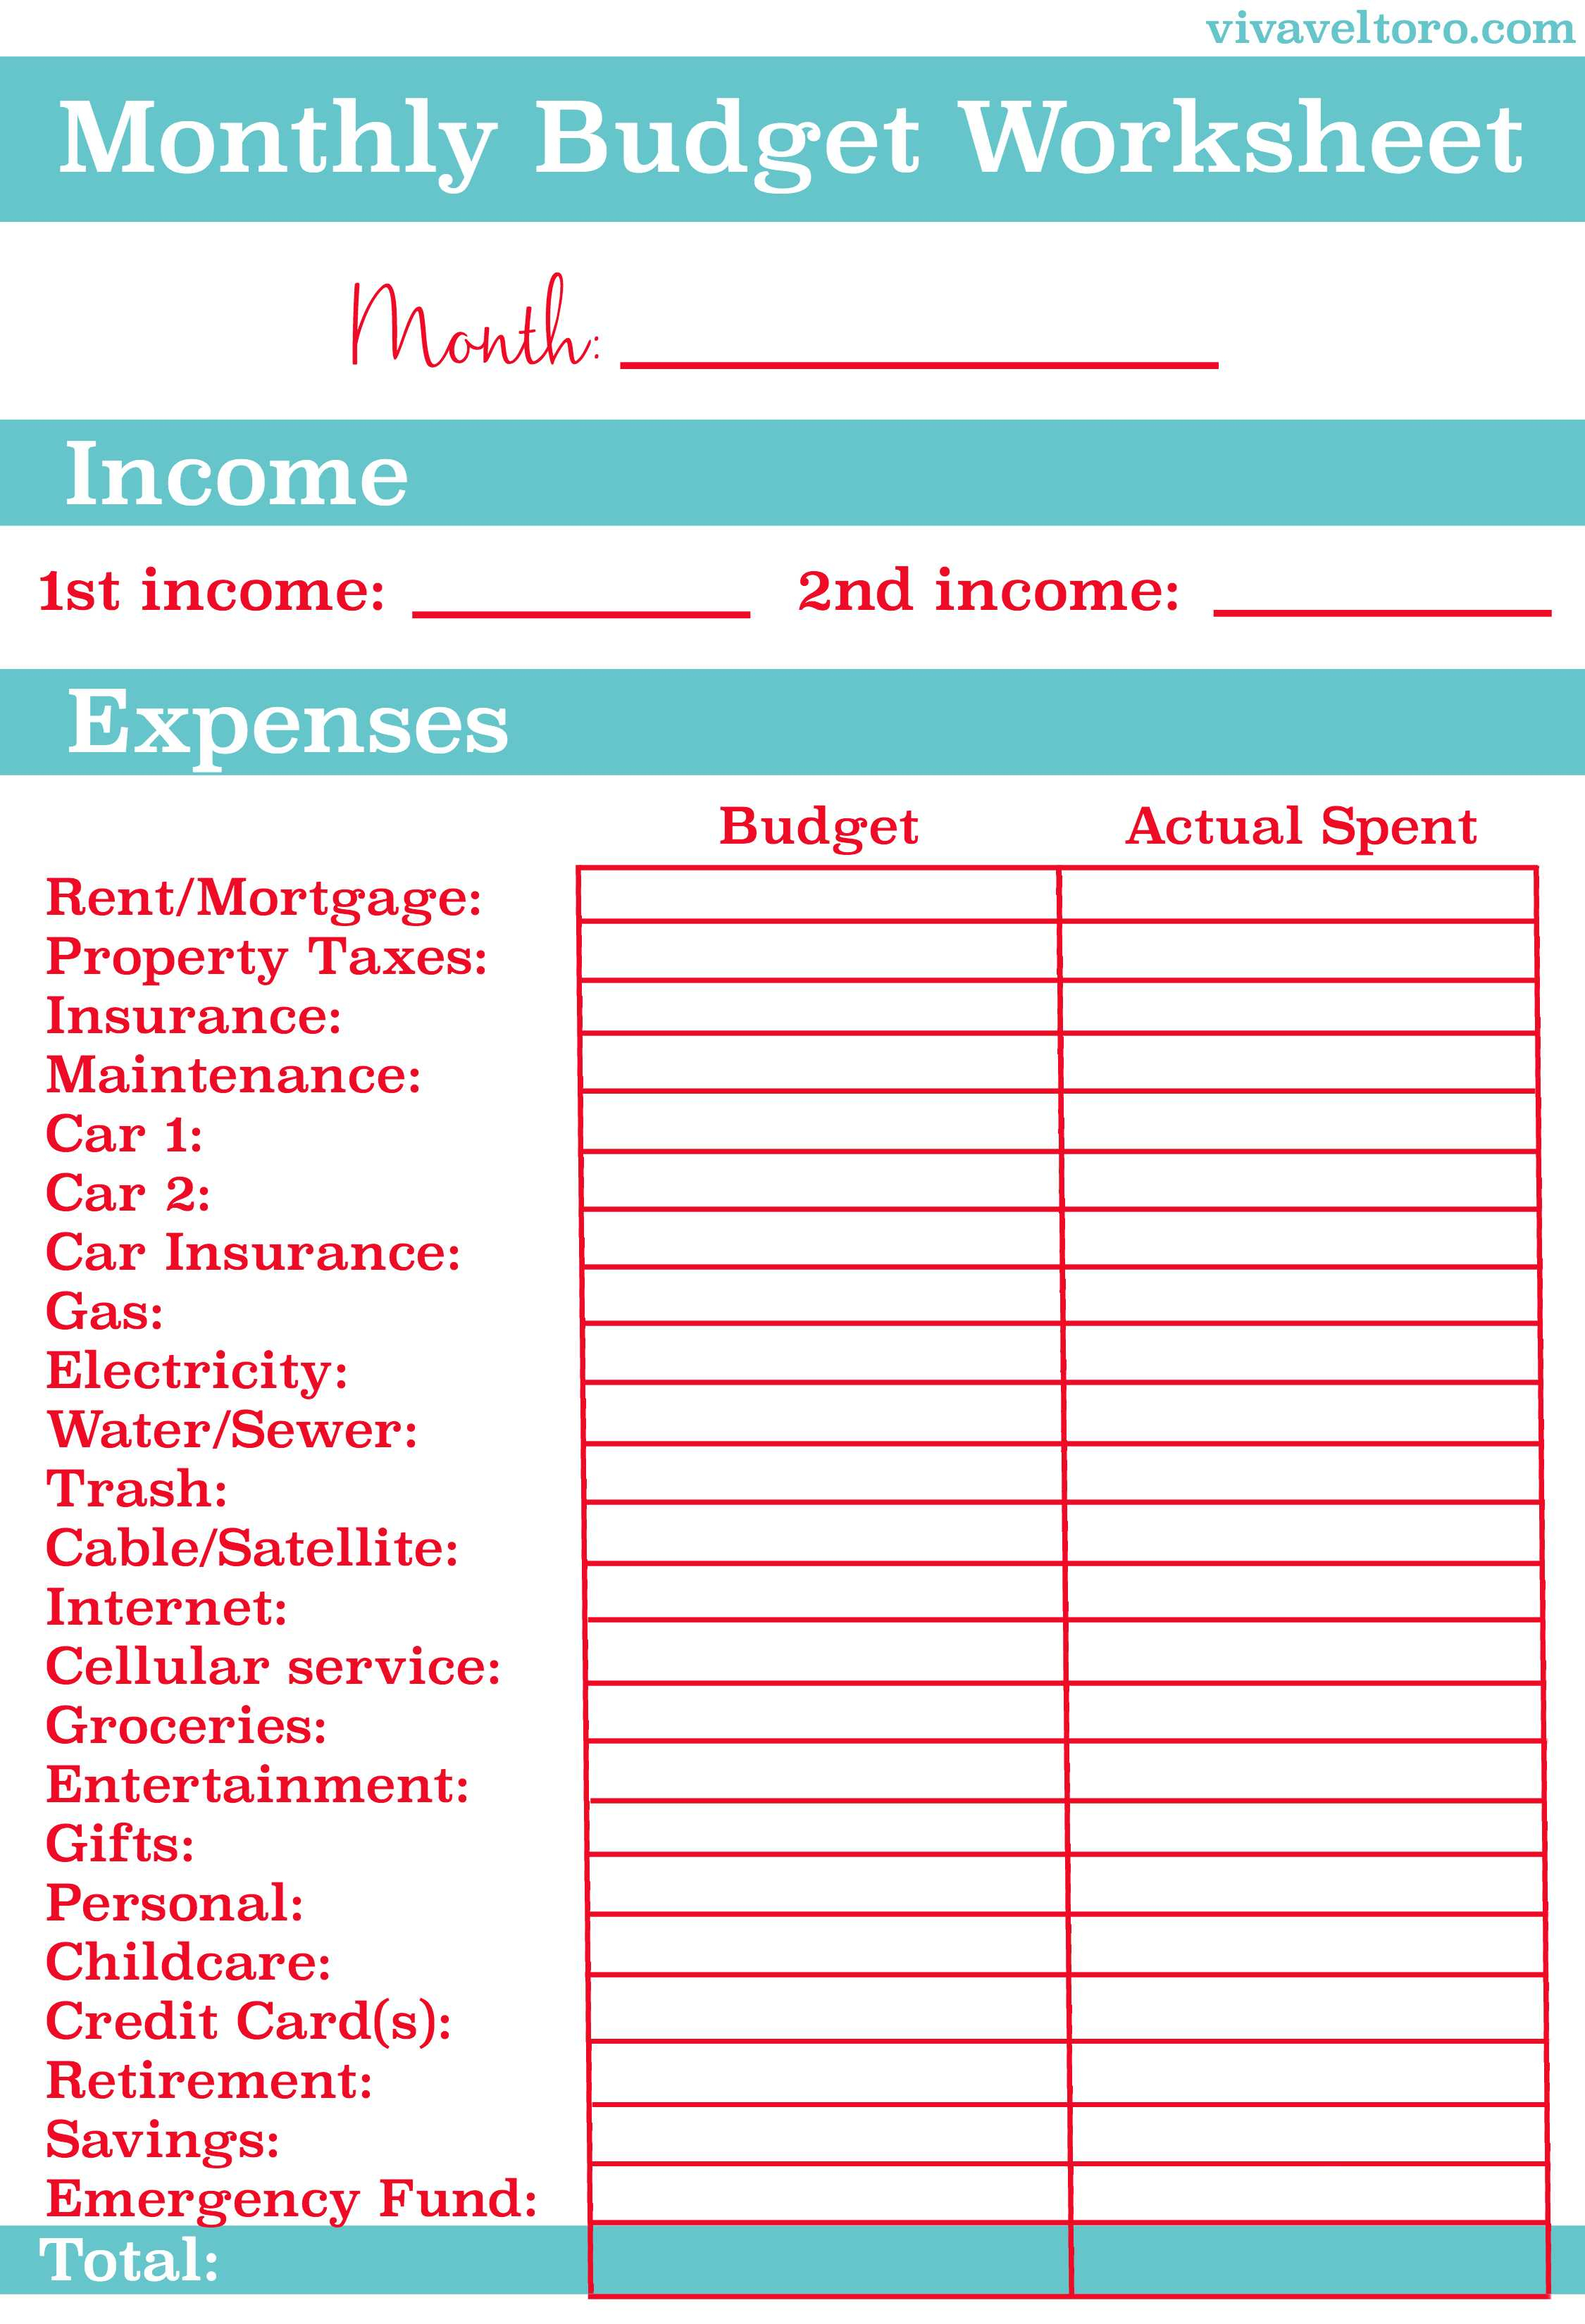 Free Online Budget Spreadsheet For Free Mileage Expense Report Template Budget Spreadsheet Excel Online